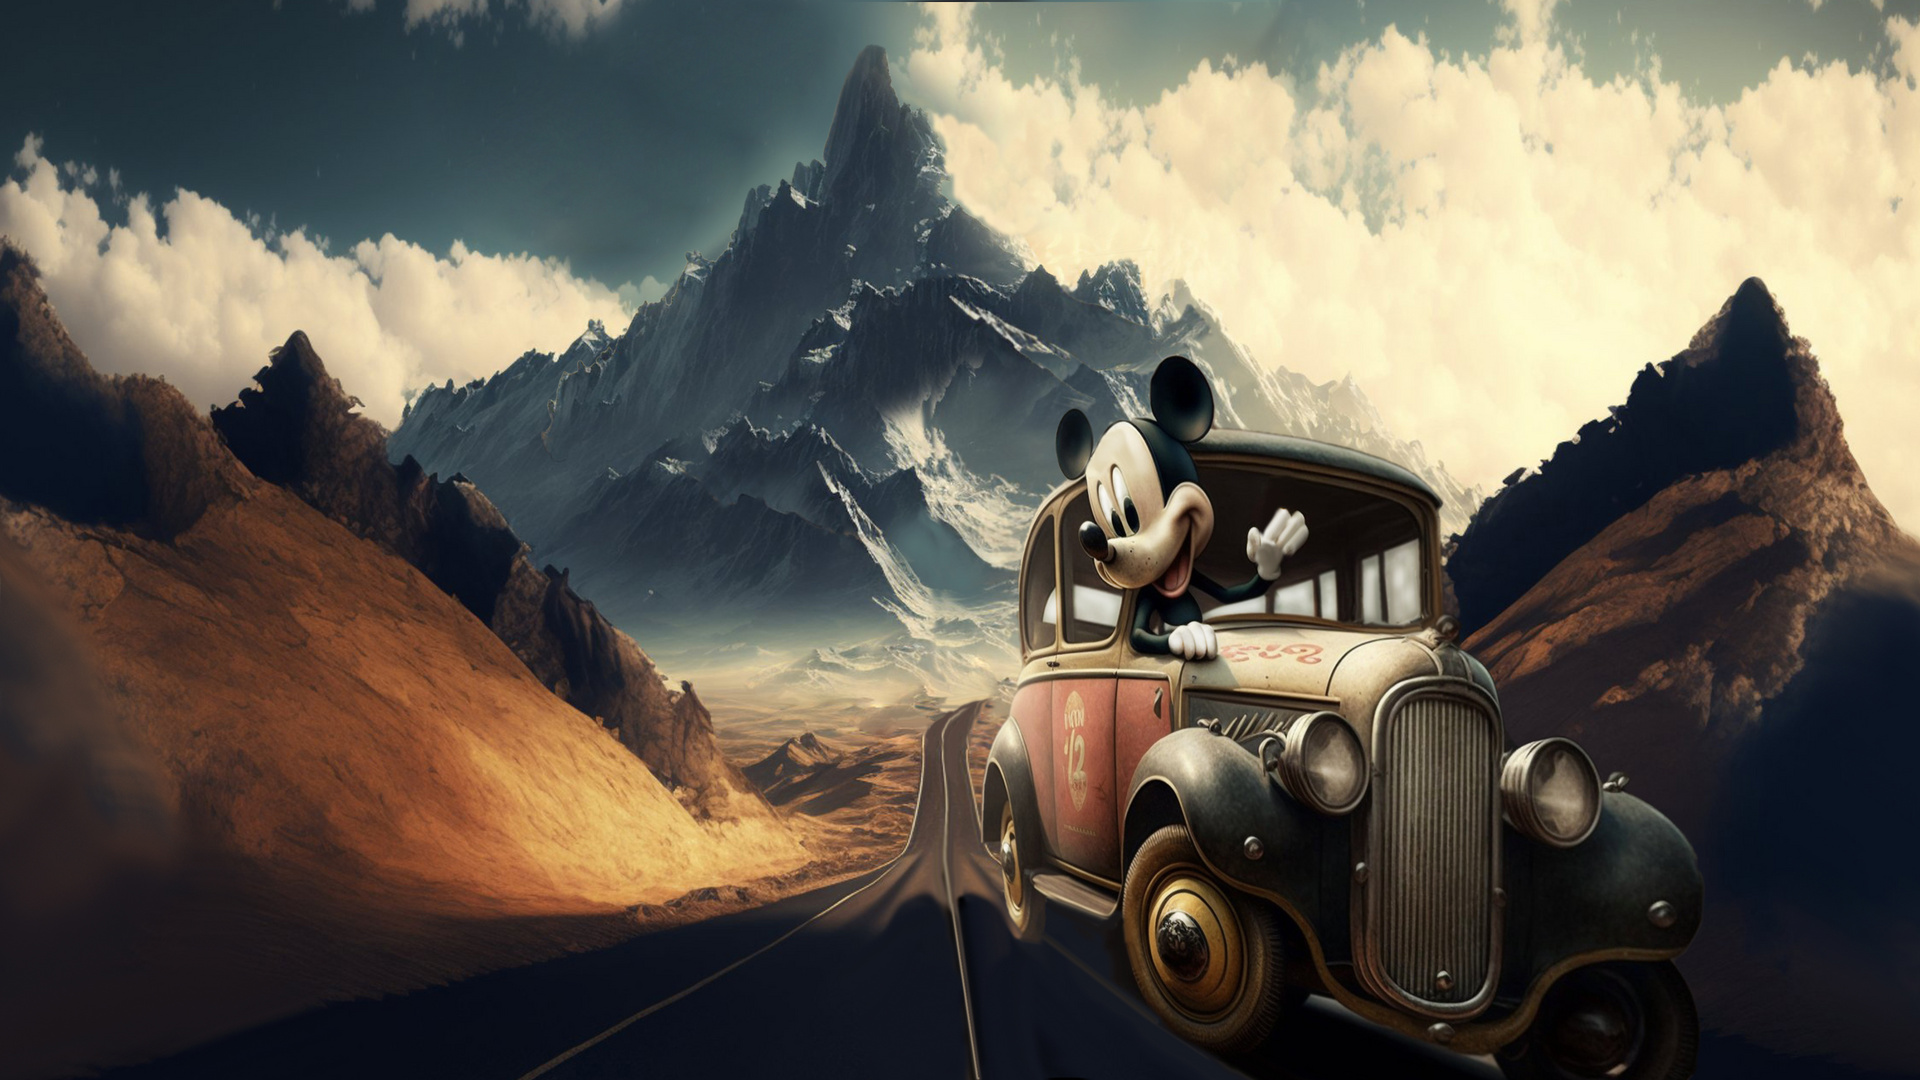 Mickey on the Road